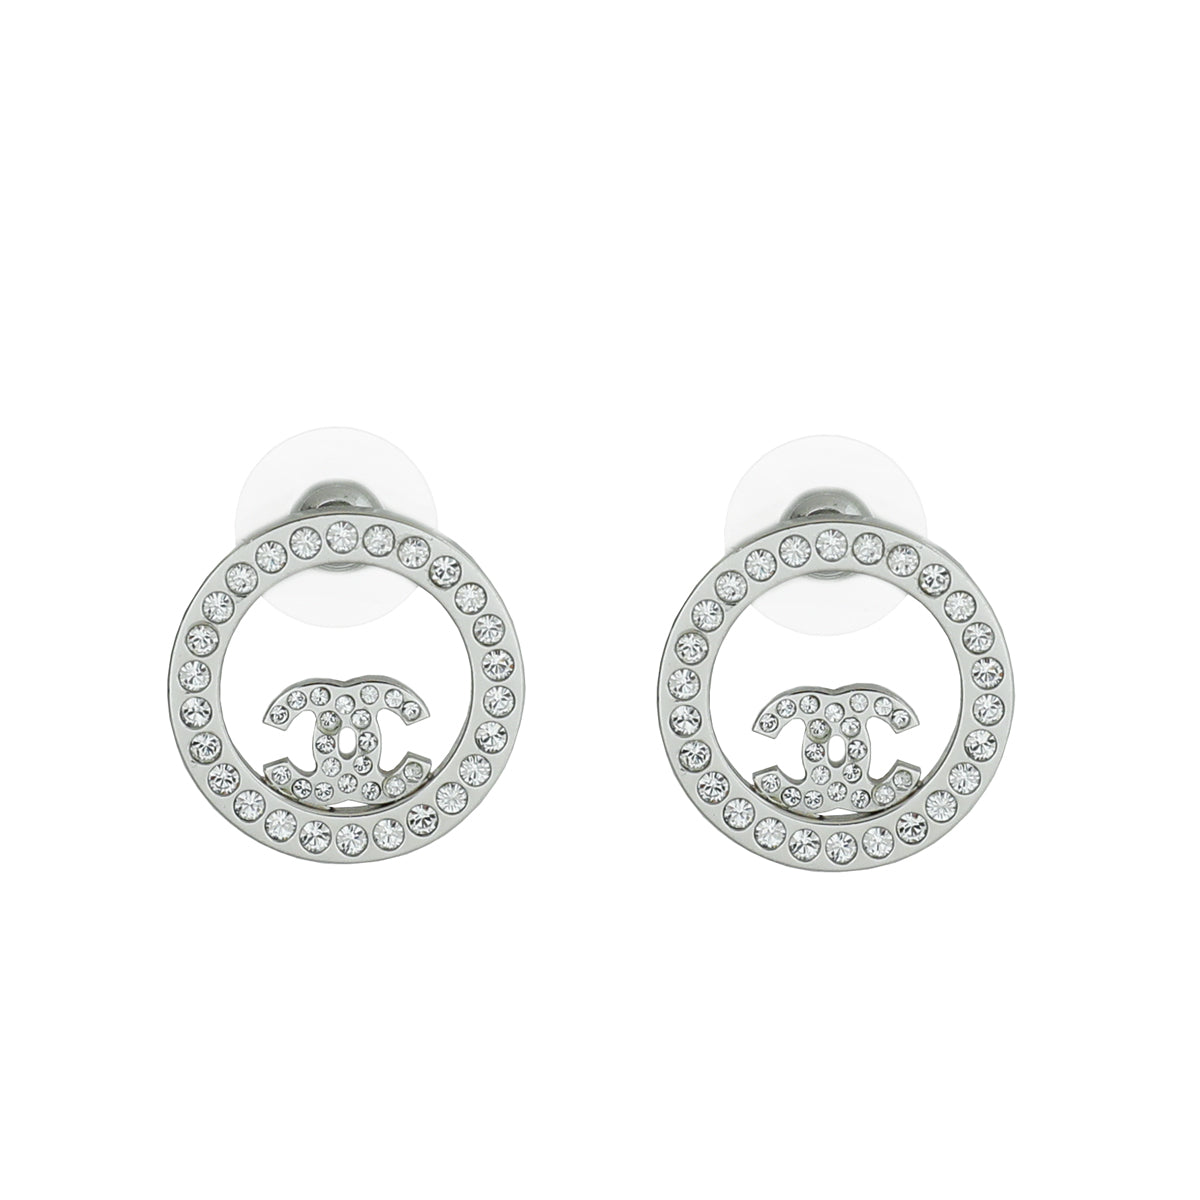 Chanel Silver CC Crystal Round Earrings